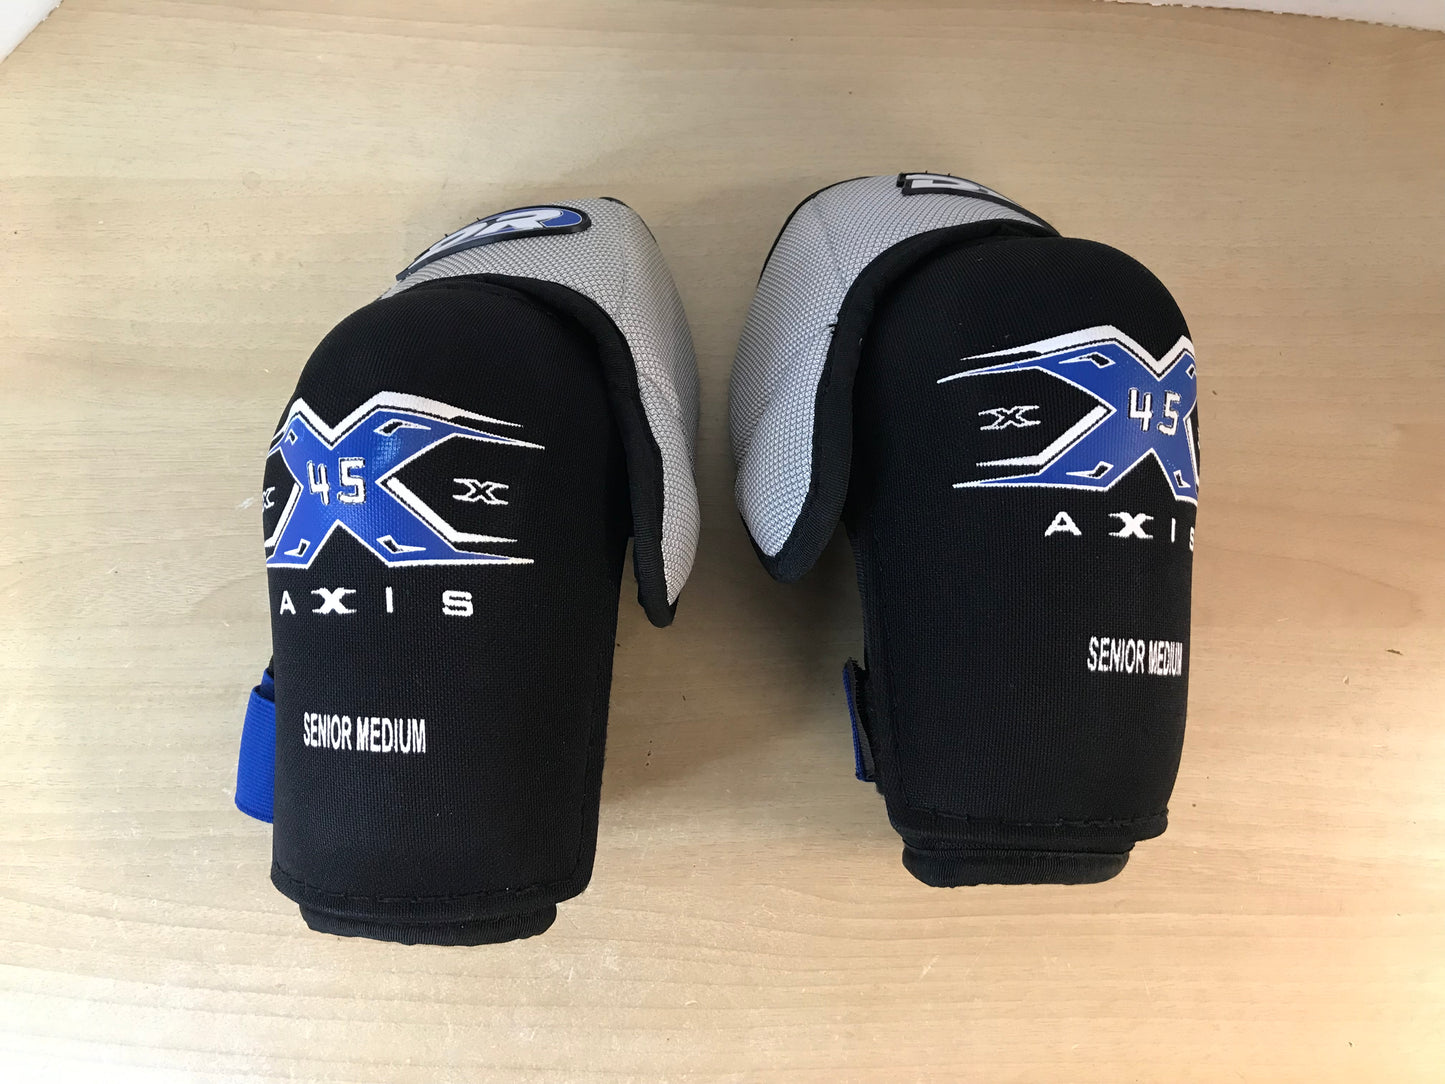 Hockey Elbow Pads Men's Size Medium DR Axis Blue Black As New Excellent